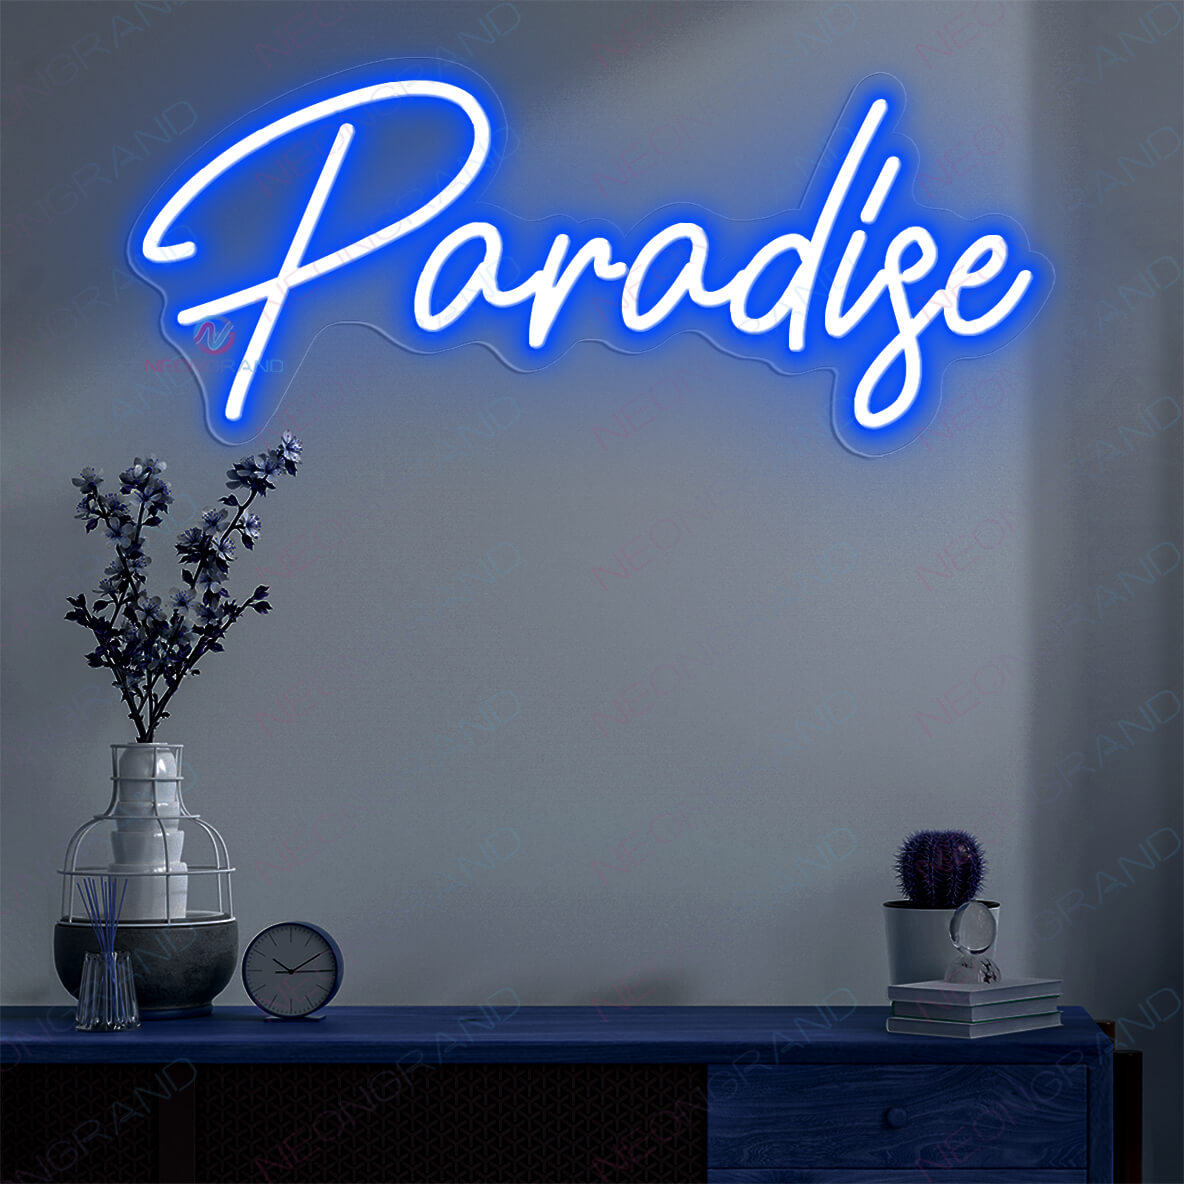 Paradise Neon Sign Bedroom Led Light Up Sign blue